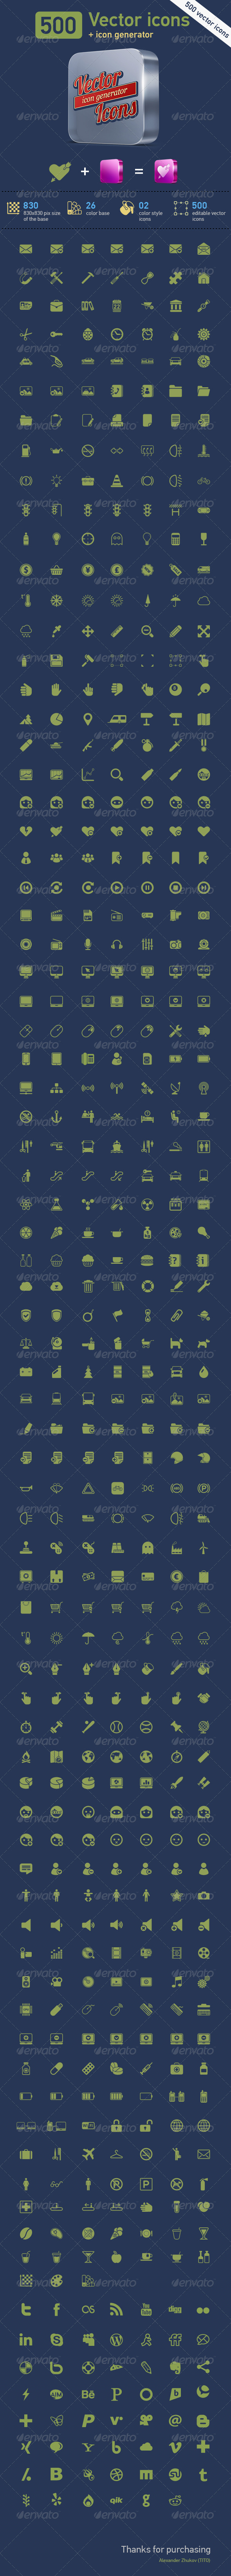 500 Vector Icons + Icon Generator in Web Icons